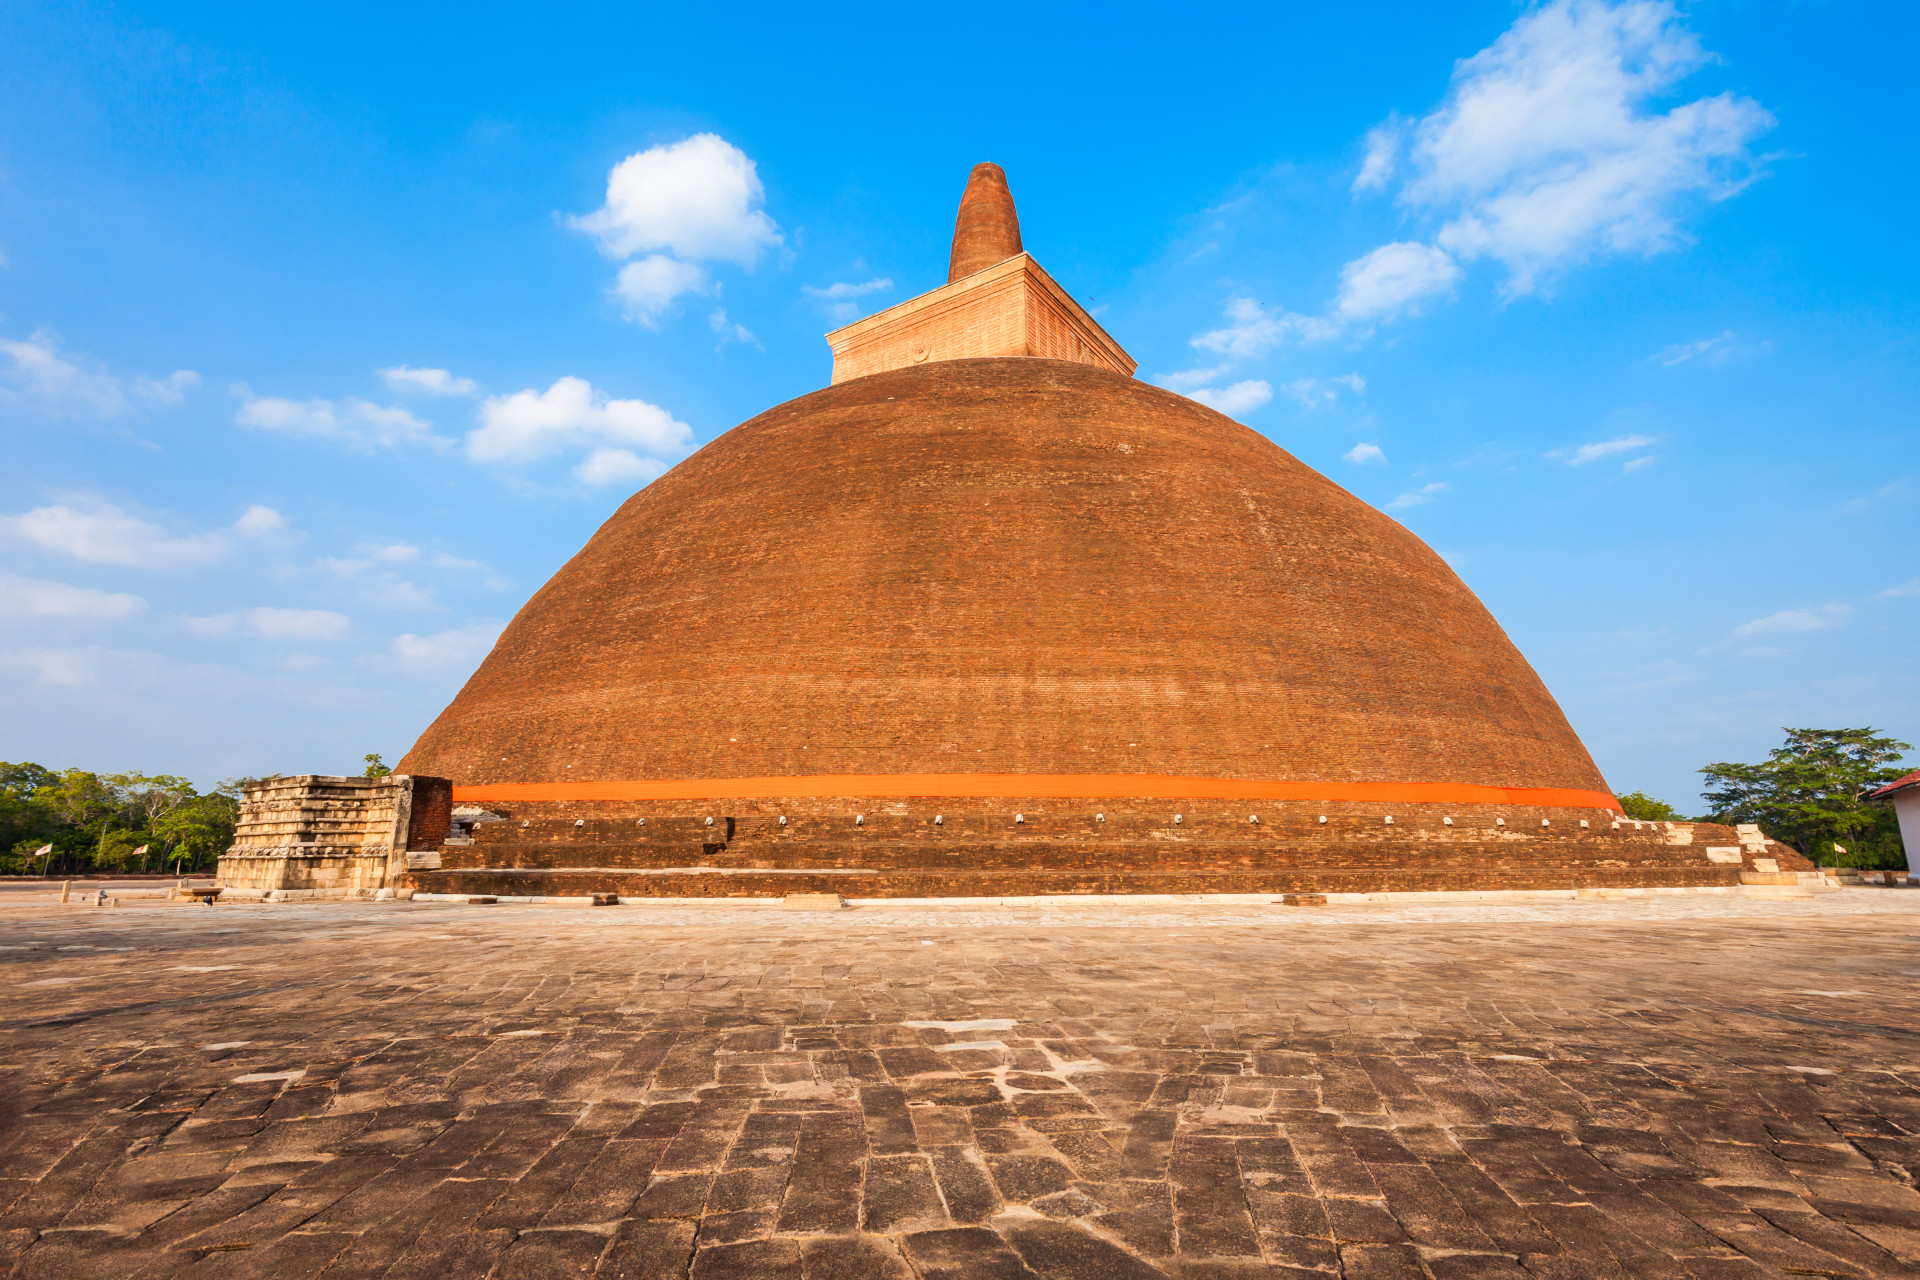 The highlight of the monastery site of Abhayagiri vihāra is an ancient stupa, the extraordinary hump-shaped Abhayagiri Dagoba (pictured).<p><a href="https://www.msn.com/en-us/community/channel/vid-7xx8mnucu55yw63we9va2gwr7uihbxwc68fxqp25x6tg4ftibpra?cvid=94631541bc0f4f89bfd59158d696ad7e">Follow us and access great exclusive content every day</a></p>